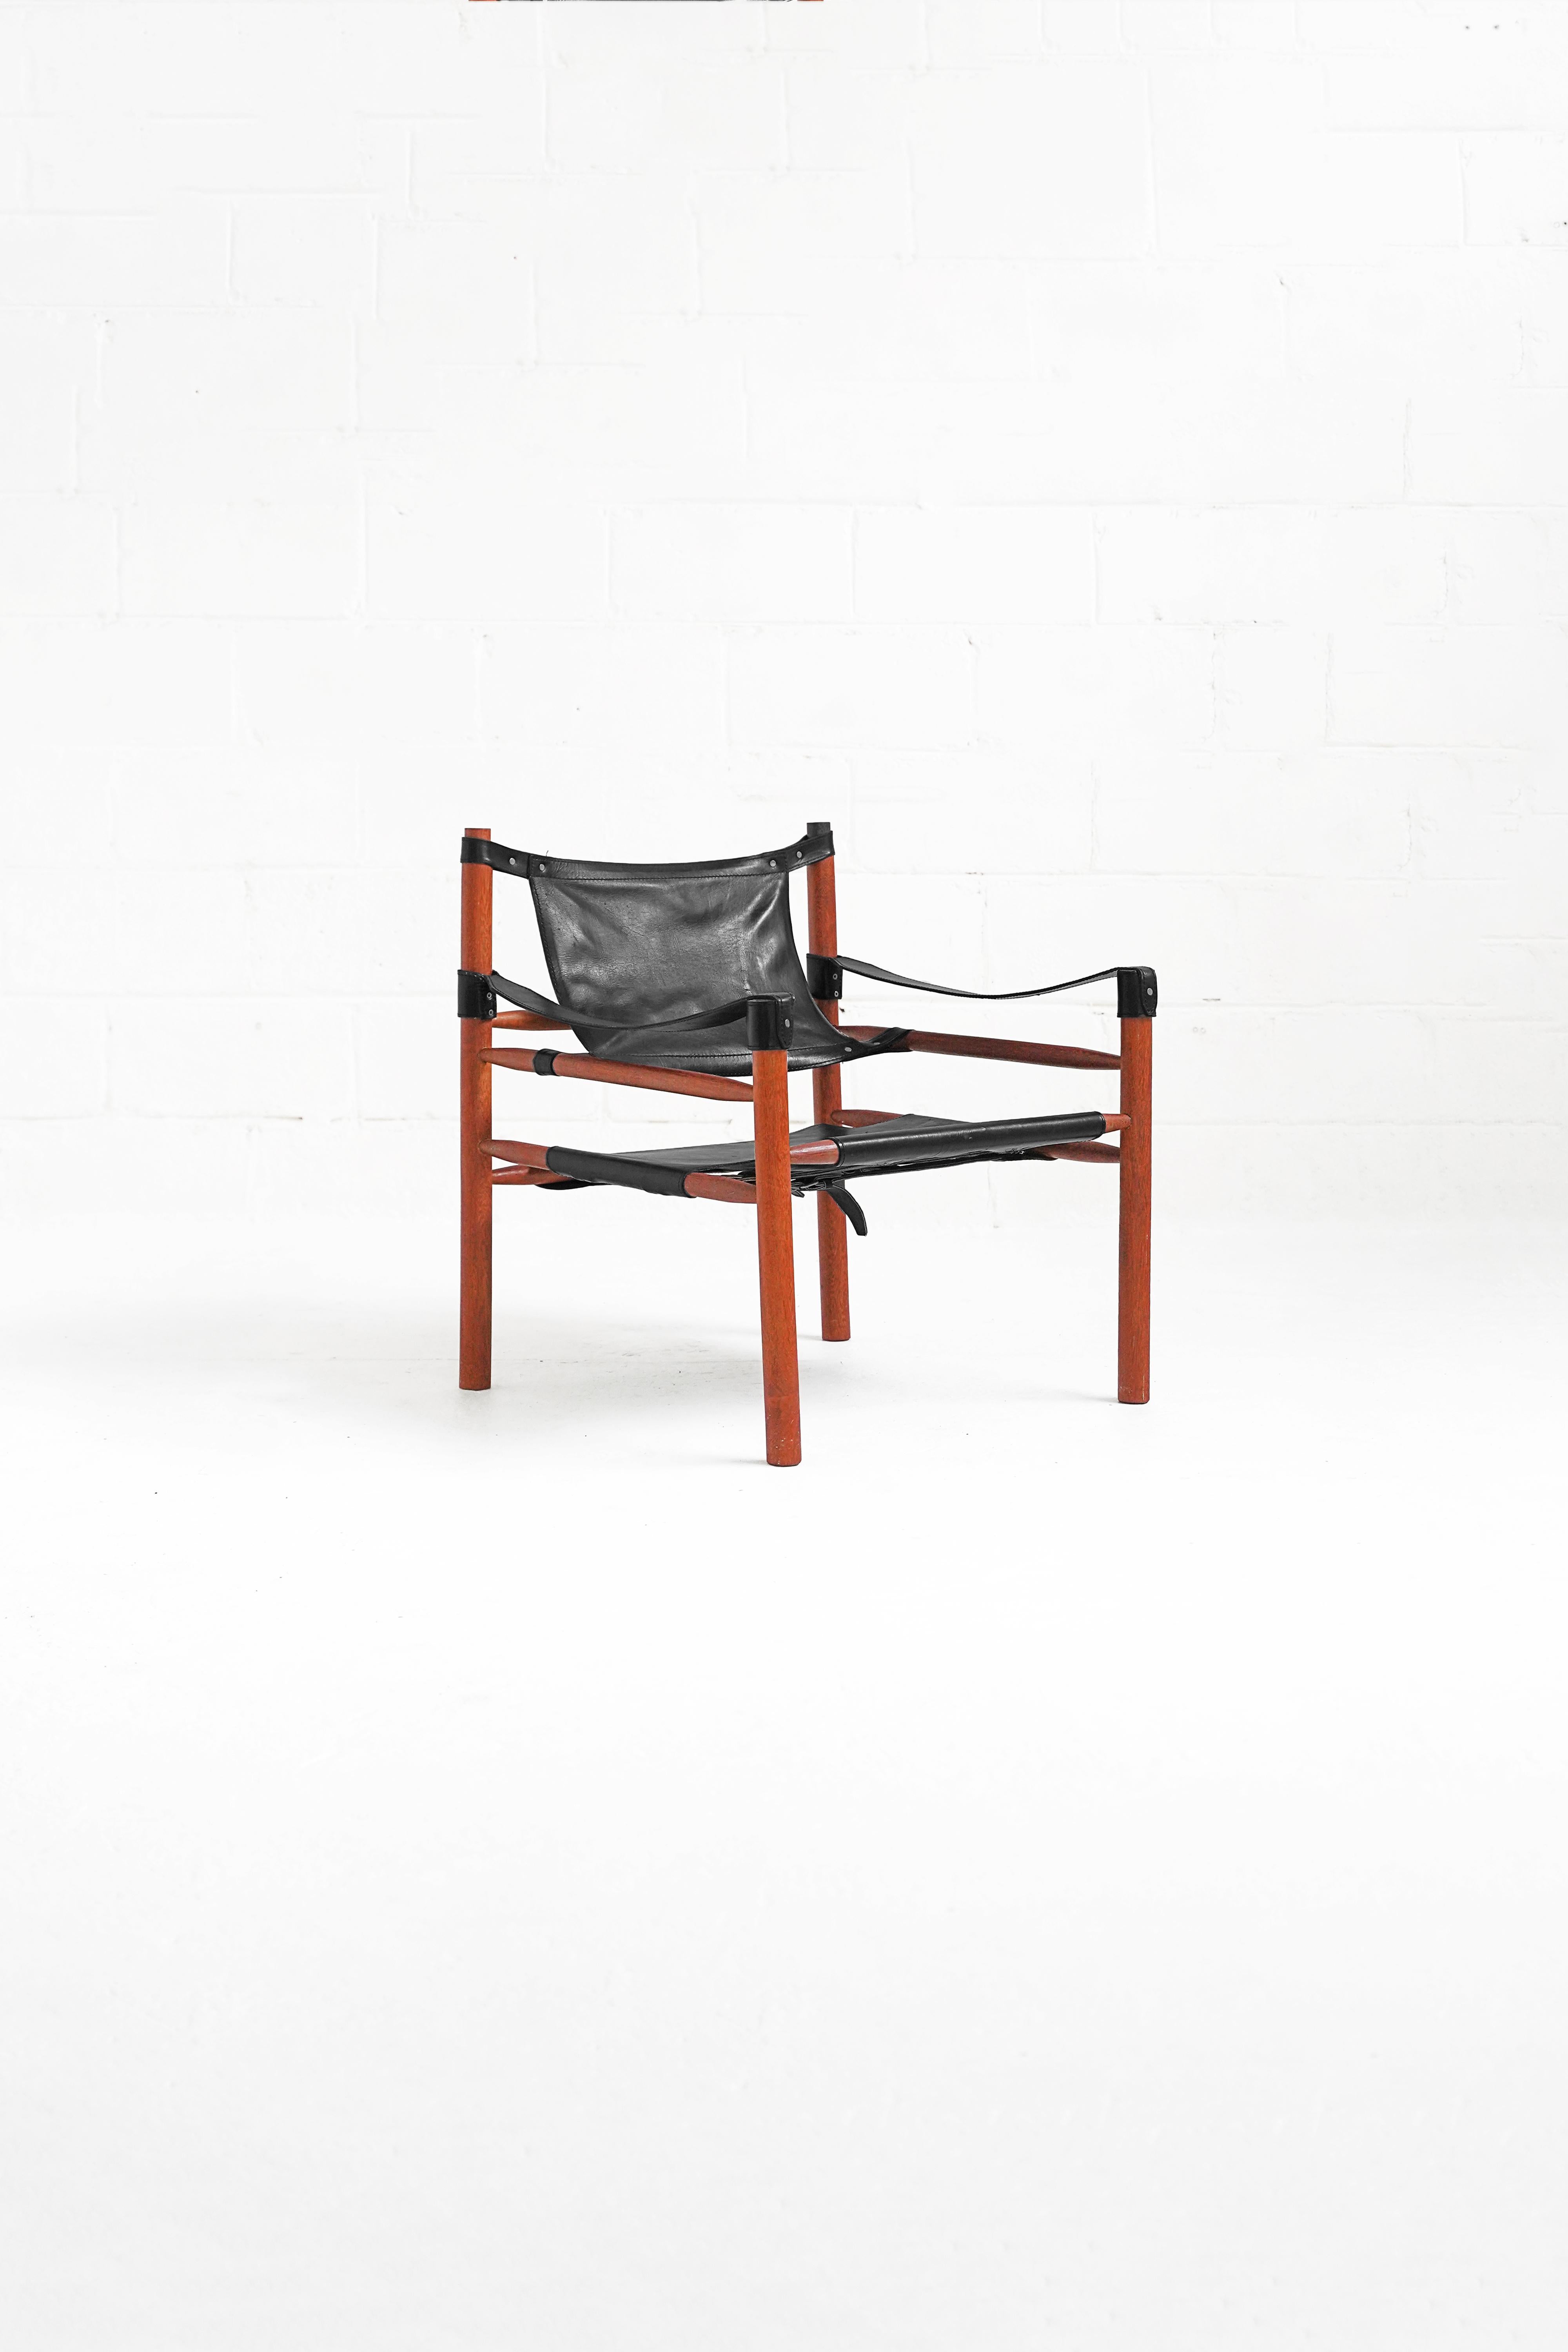 Black Leather Safari Sling Chair in the style of Arne Norell for Norells AB 1